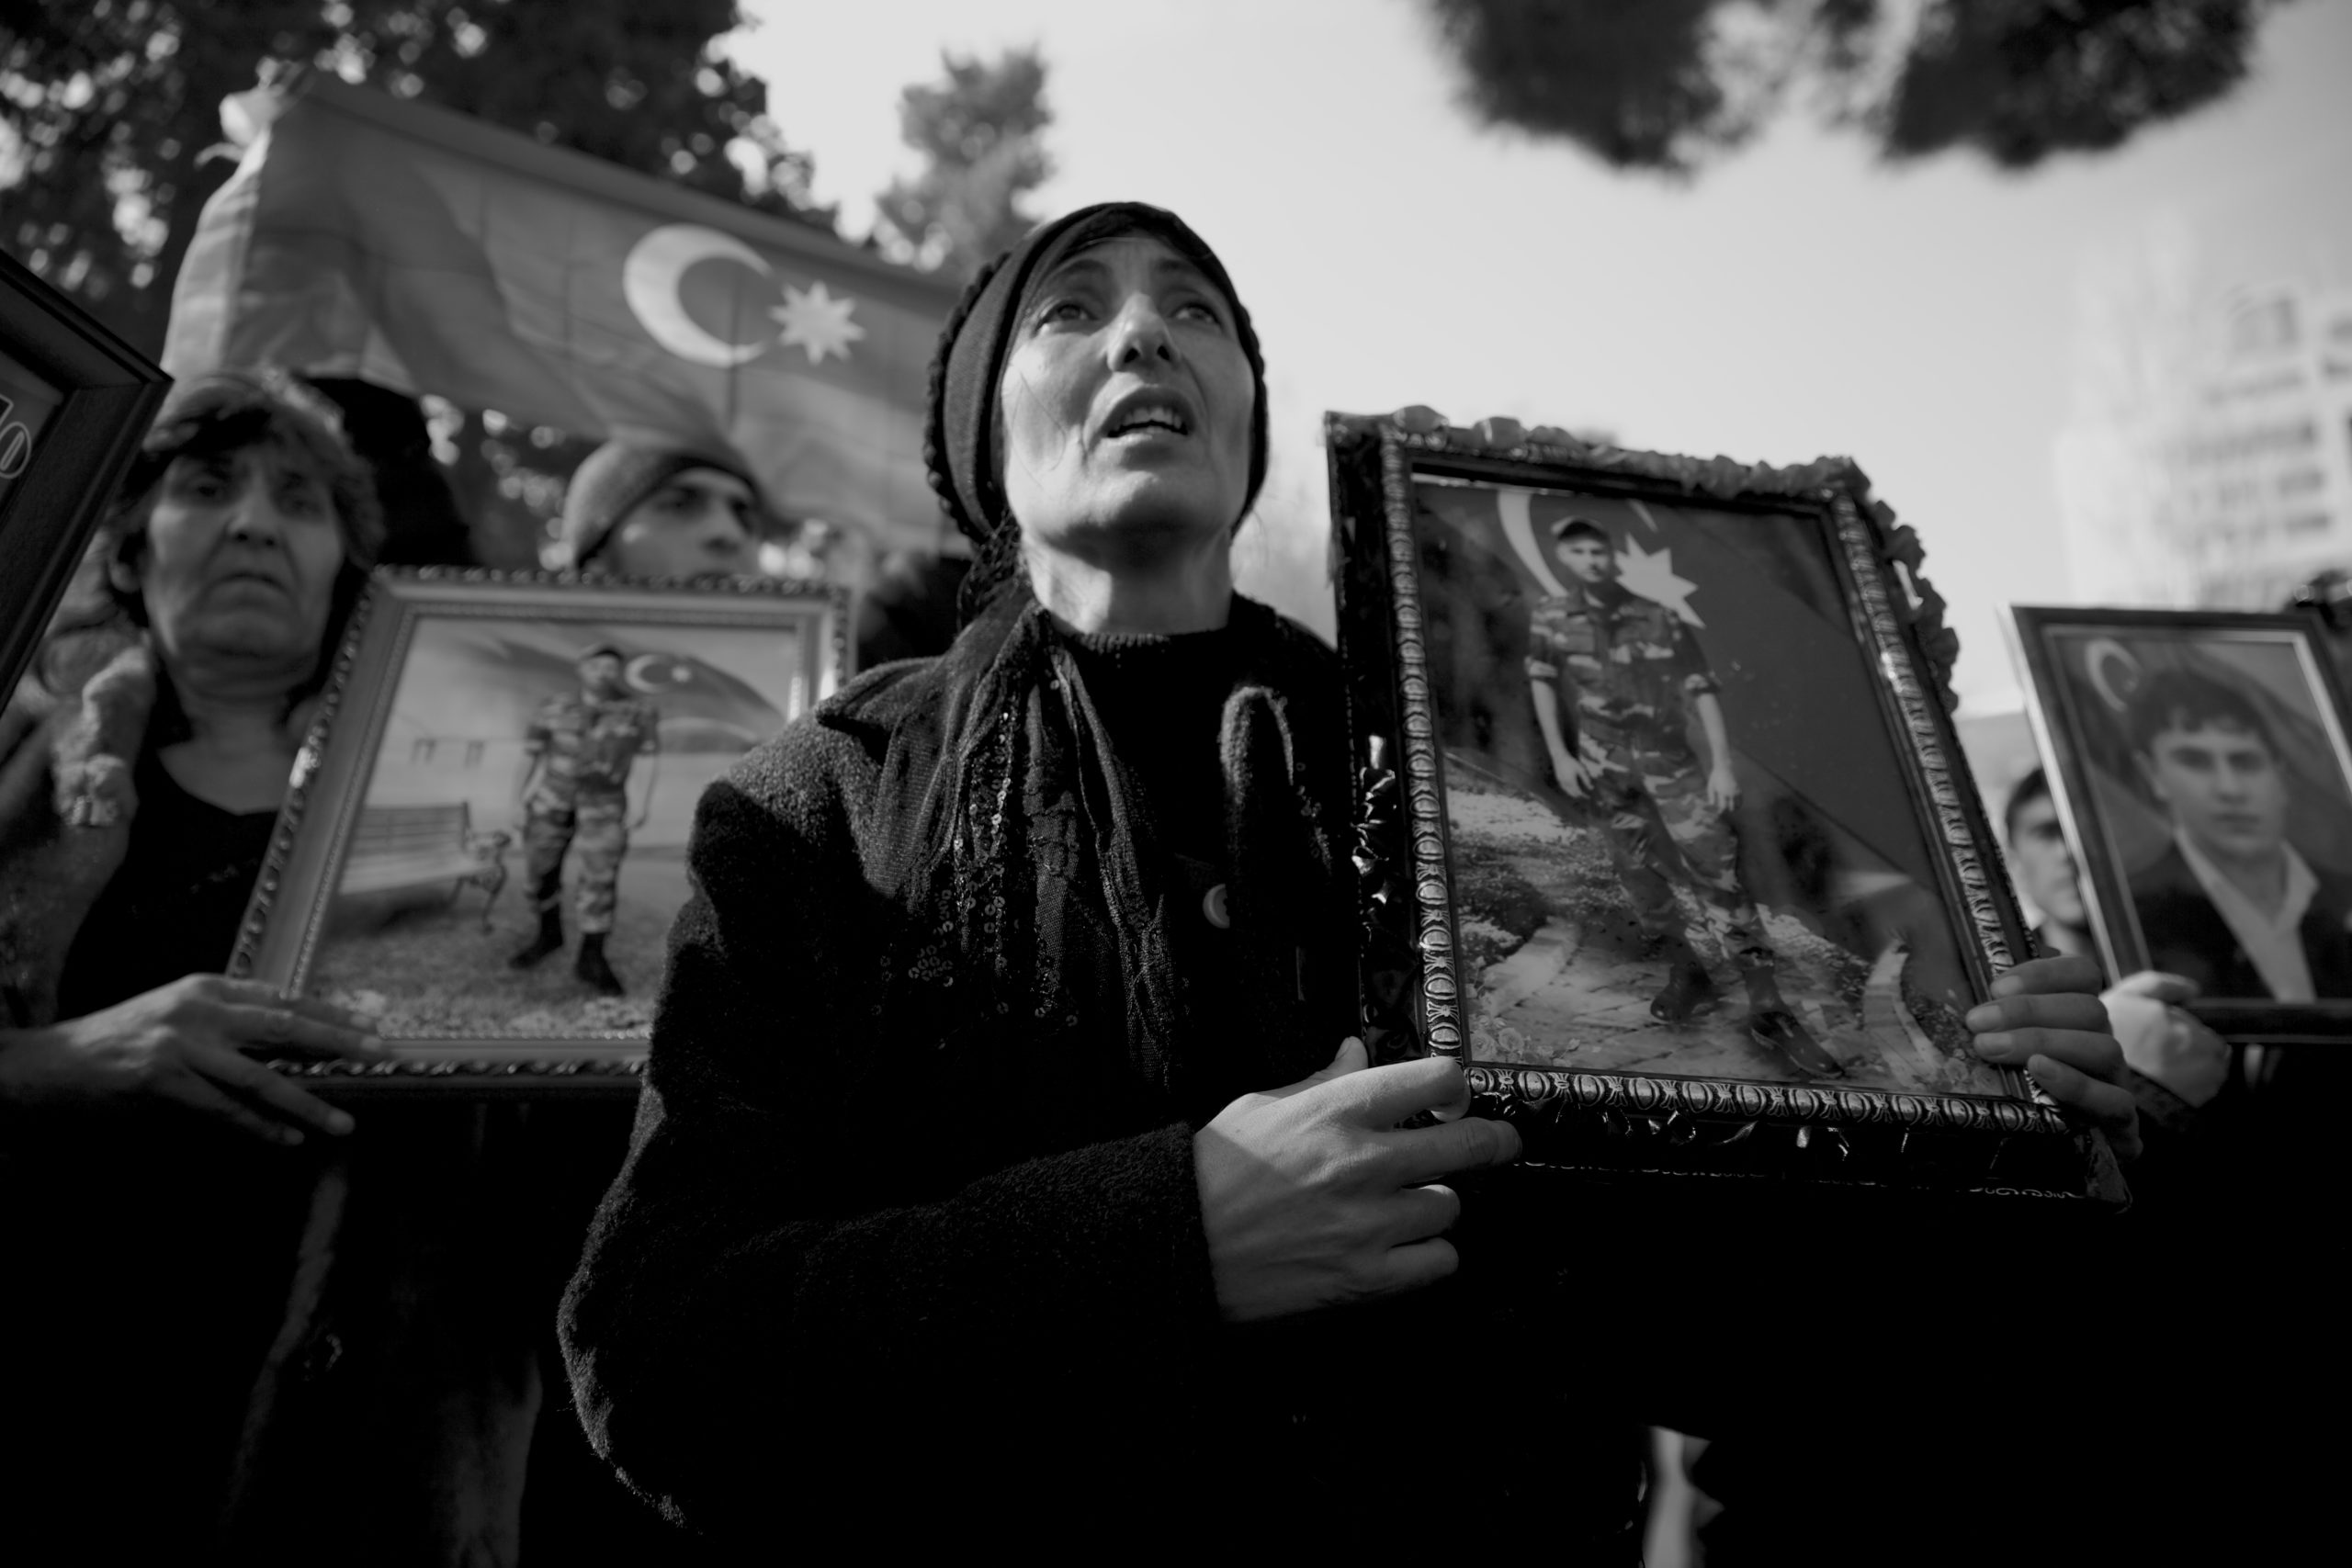 The parents of soldiers who died took part in the demonstration, Fountain Square, Baku, March 2013